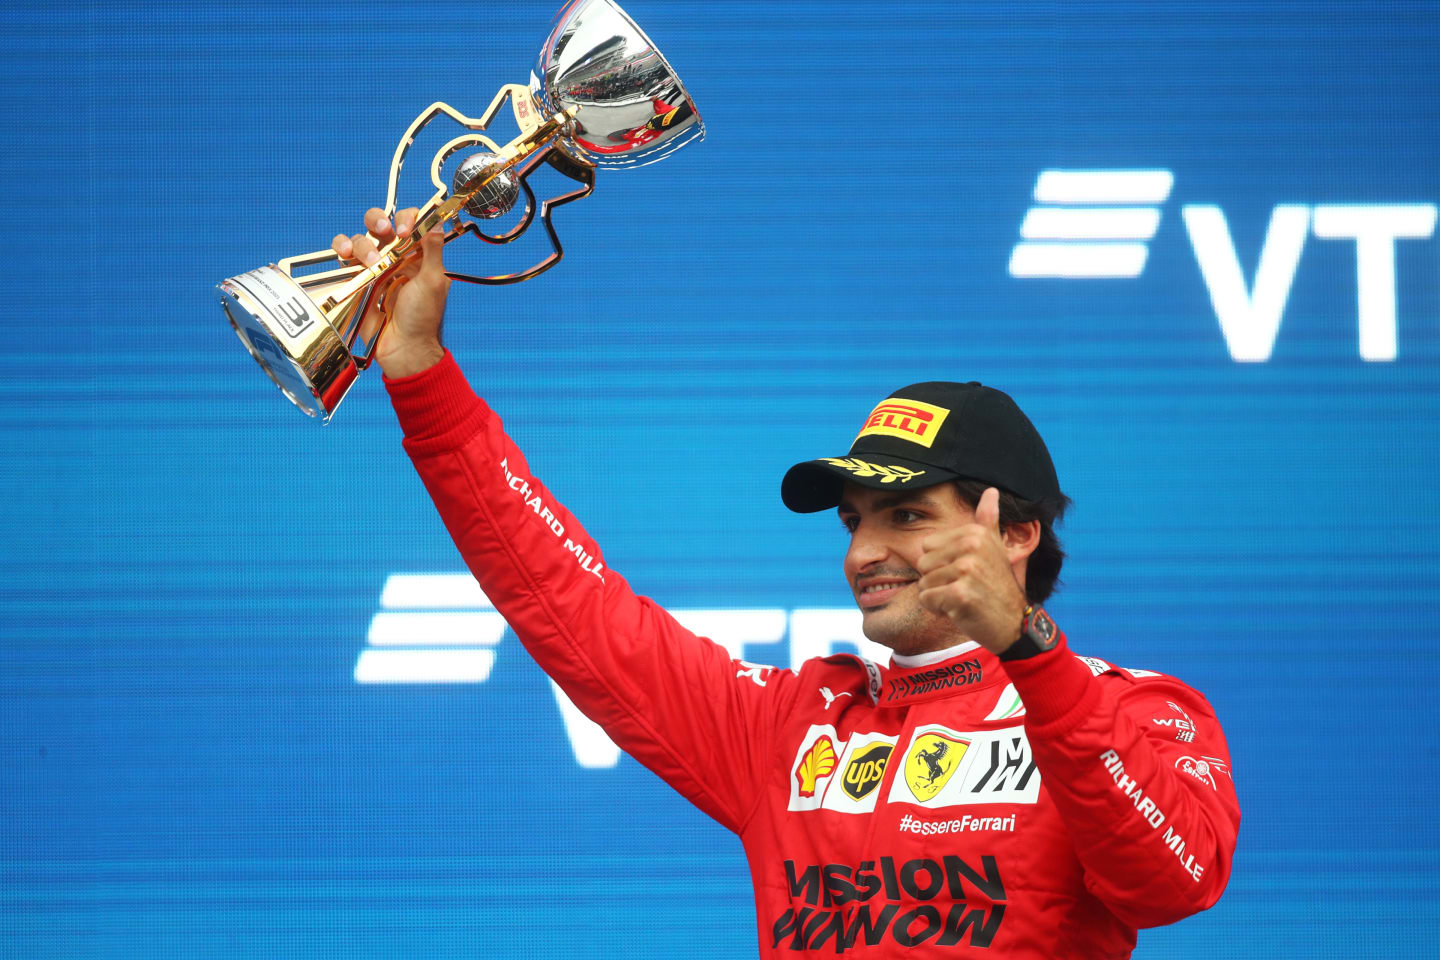 SOCHI, RUSSIA - SEPTEMBER 26: Third placed Carlos Sainz of Spain and Ferrari celebrates on the podium during the F1 Grand Prix of Russia at Sochi Autodrom on September 26, 2021 in Sochi, Russia. (Photo by Mark Thompson/Getty Images)